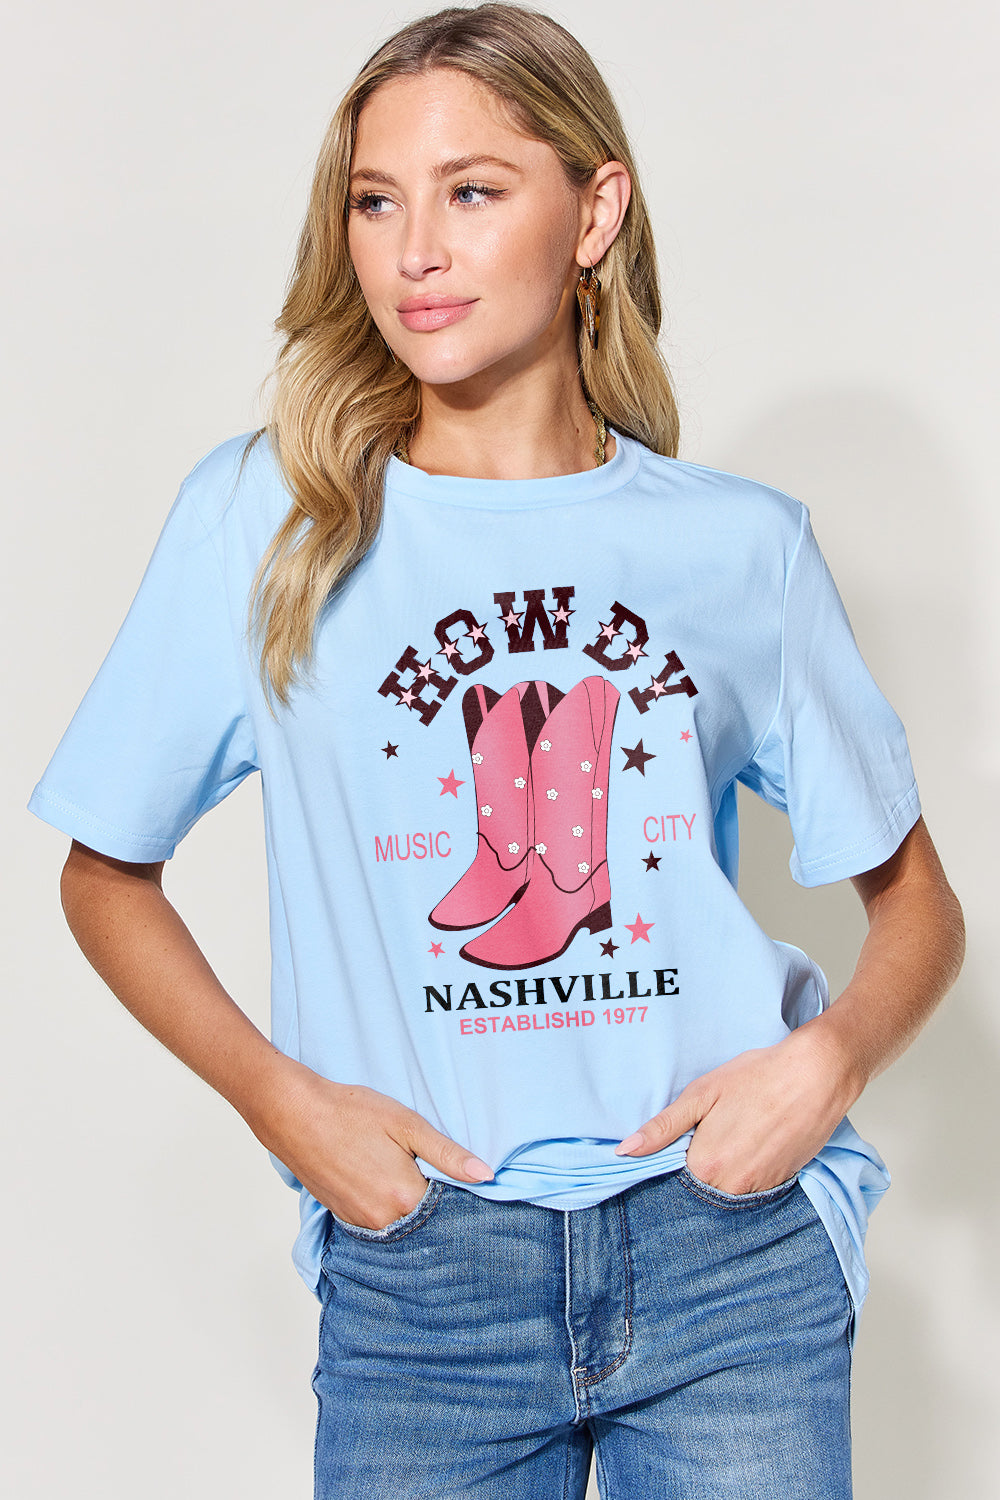 Simply Love Full Size Howdy Nashville Cowboy Boots Graphic Round Neck Short Sleeve T-Shirt